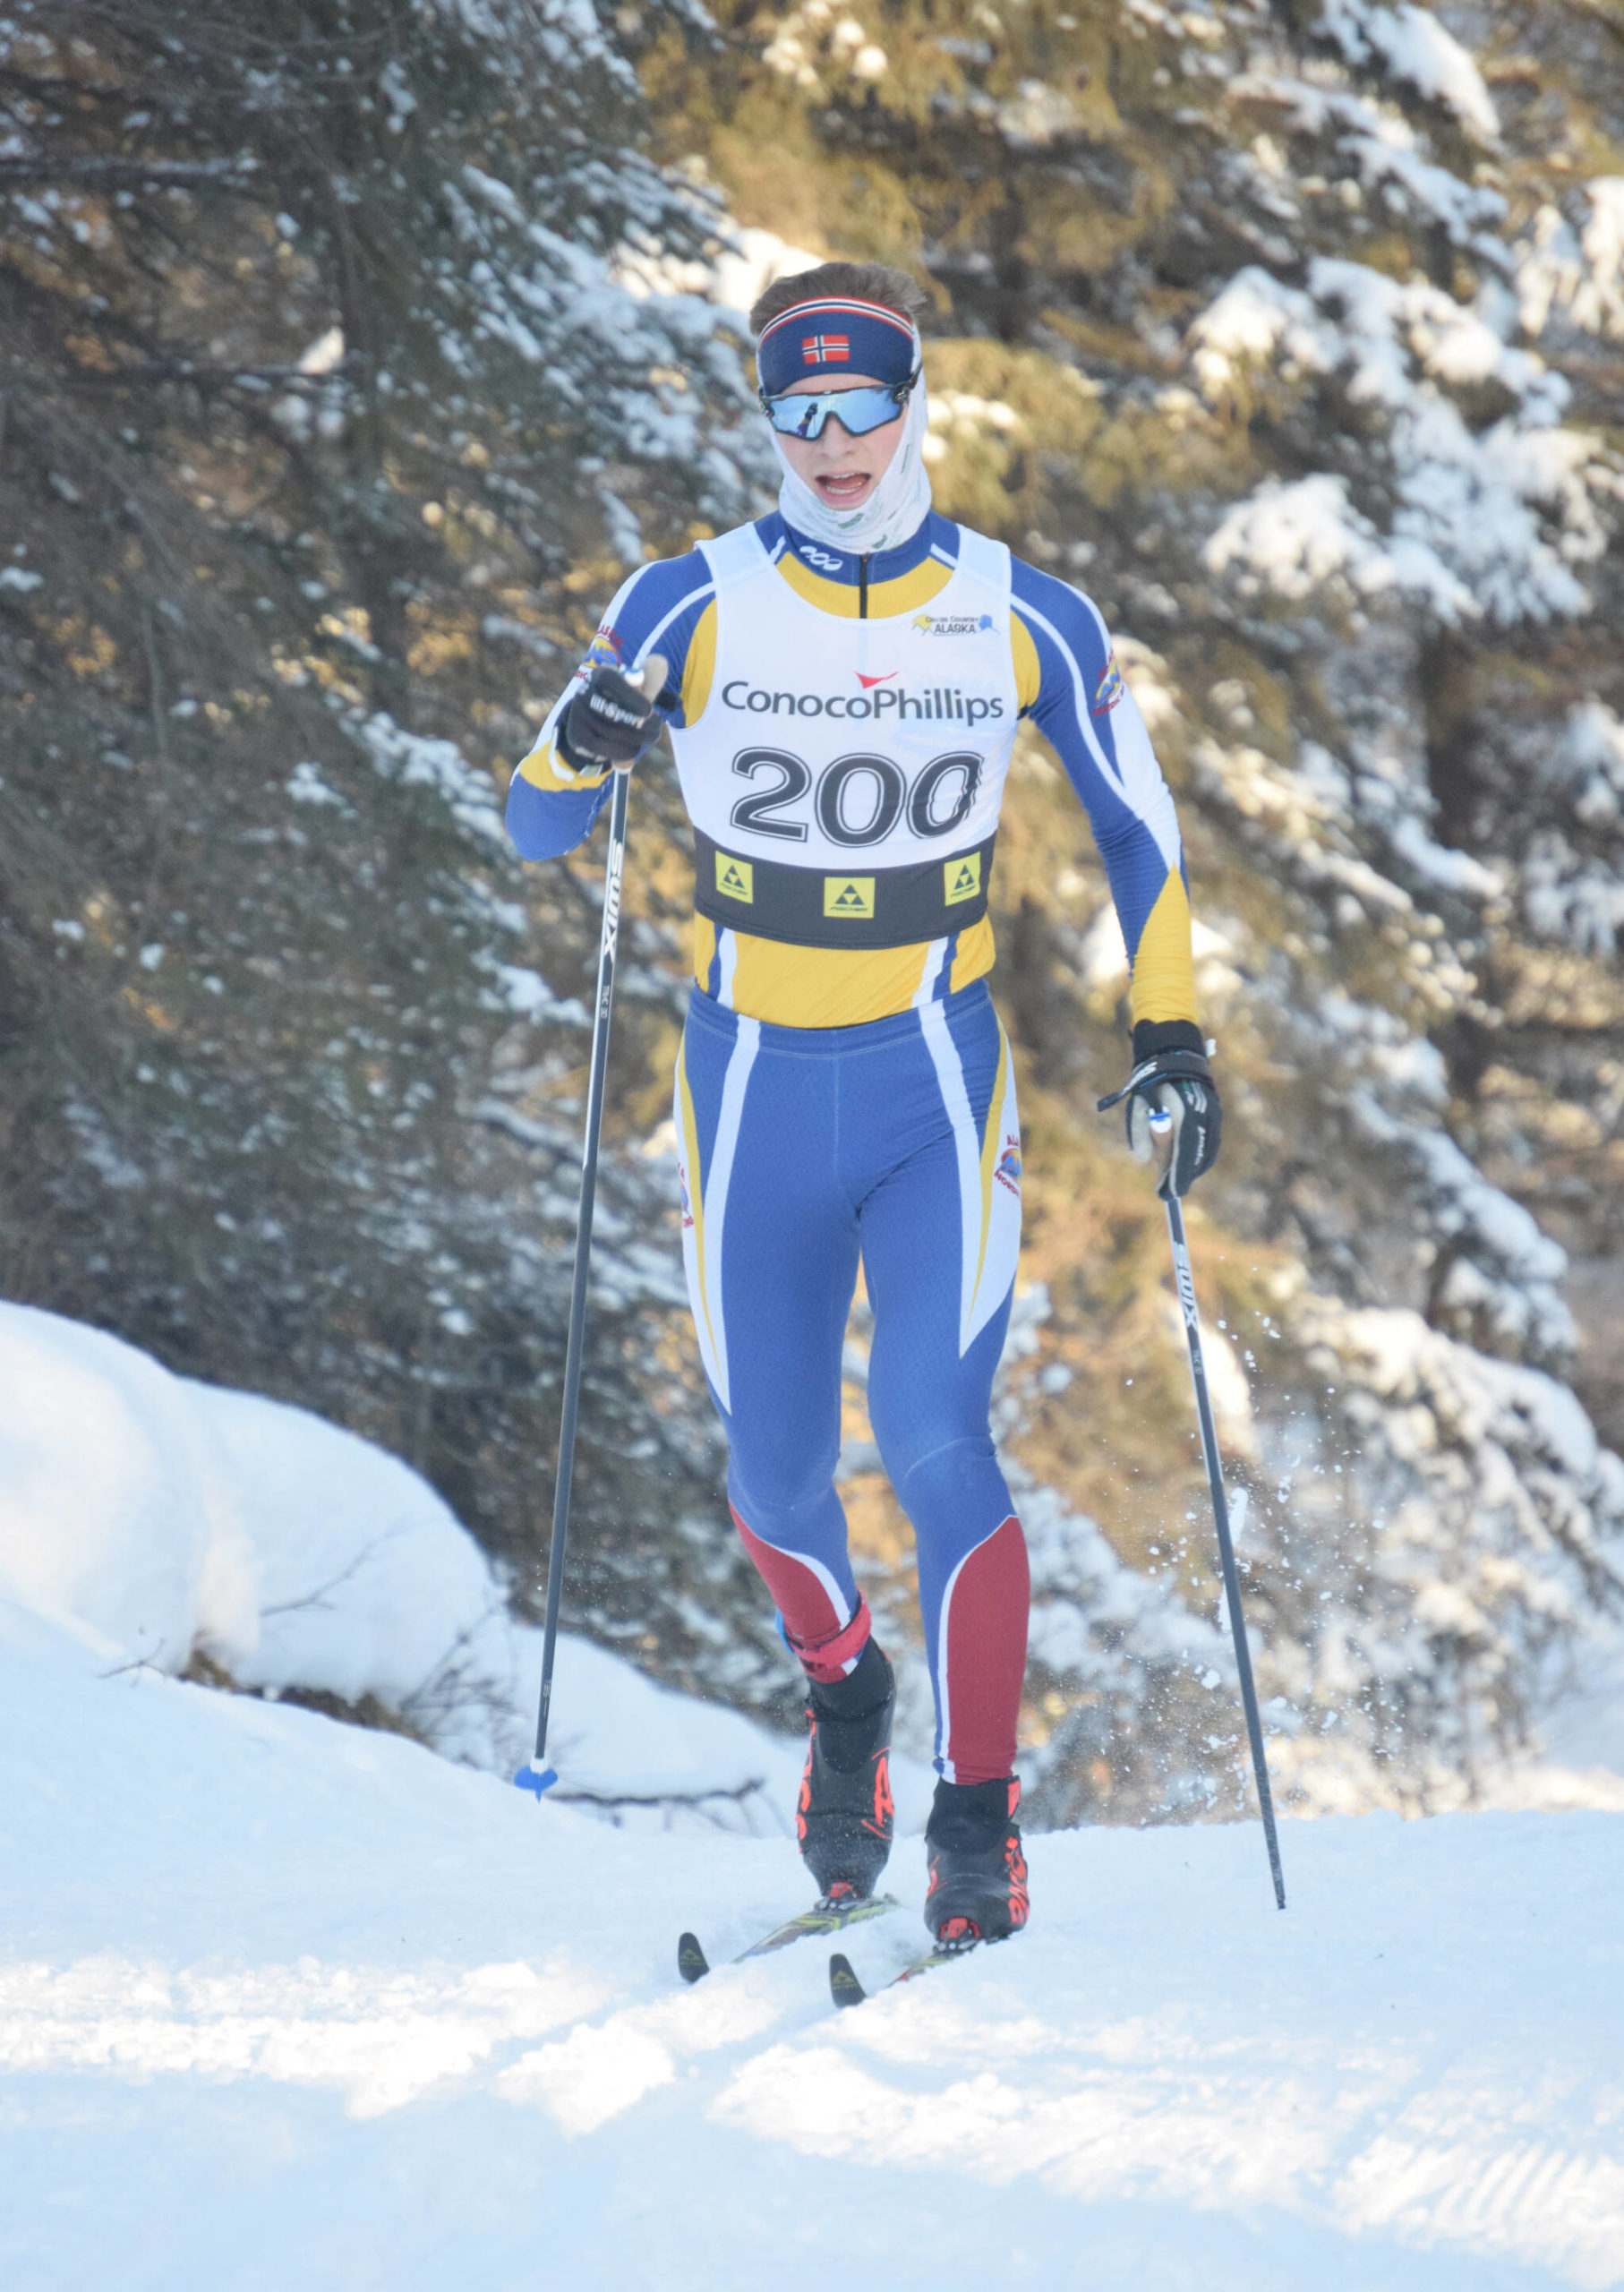 Kenai Central’s Tyler Hippchen competes at Besh Cup 4 on Sunday, Jan. 16, 2022, at Tsalteshi Trails just outside of Soldotna, Alaska. (Photo by Jeff Helminiak/Peninsula Clarion)